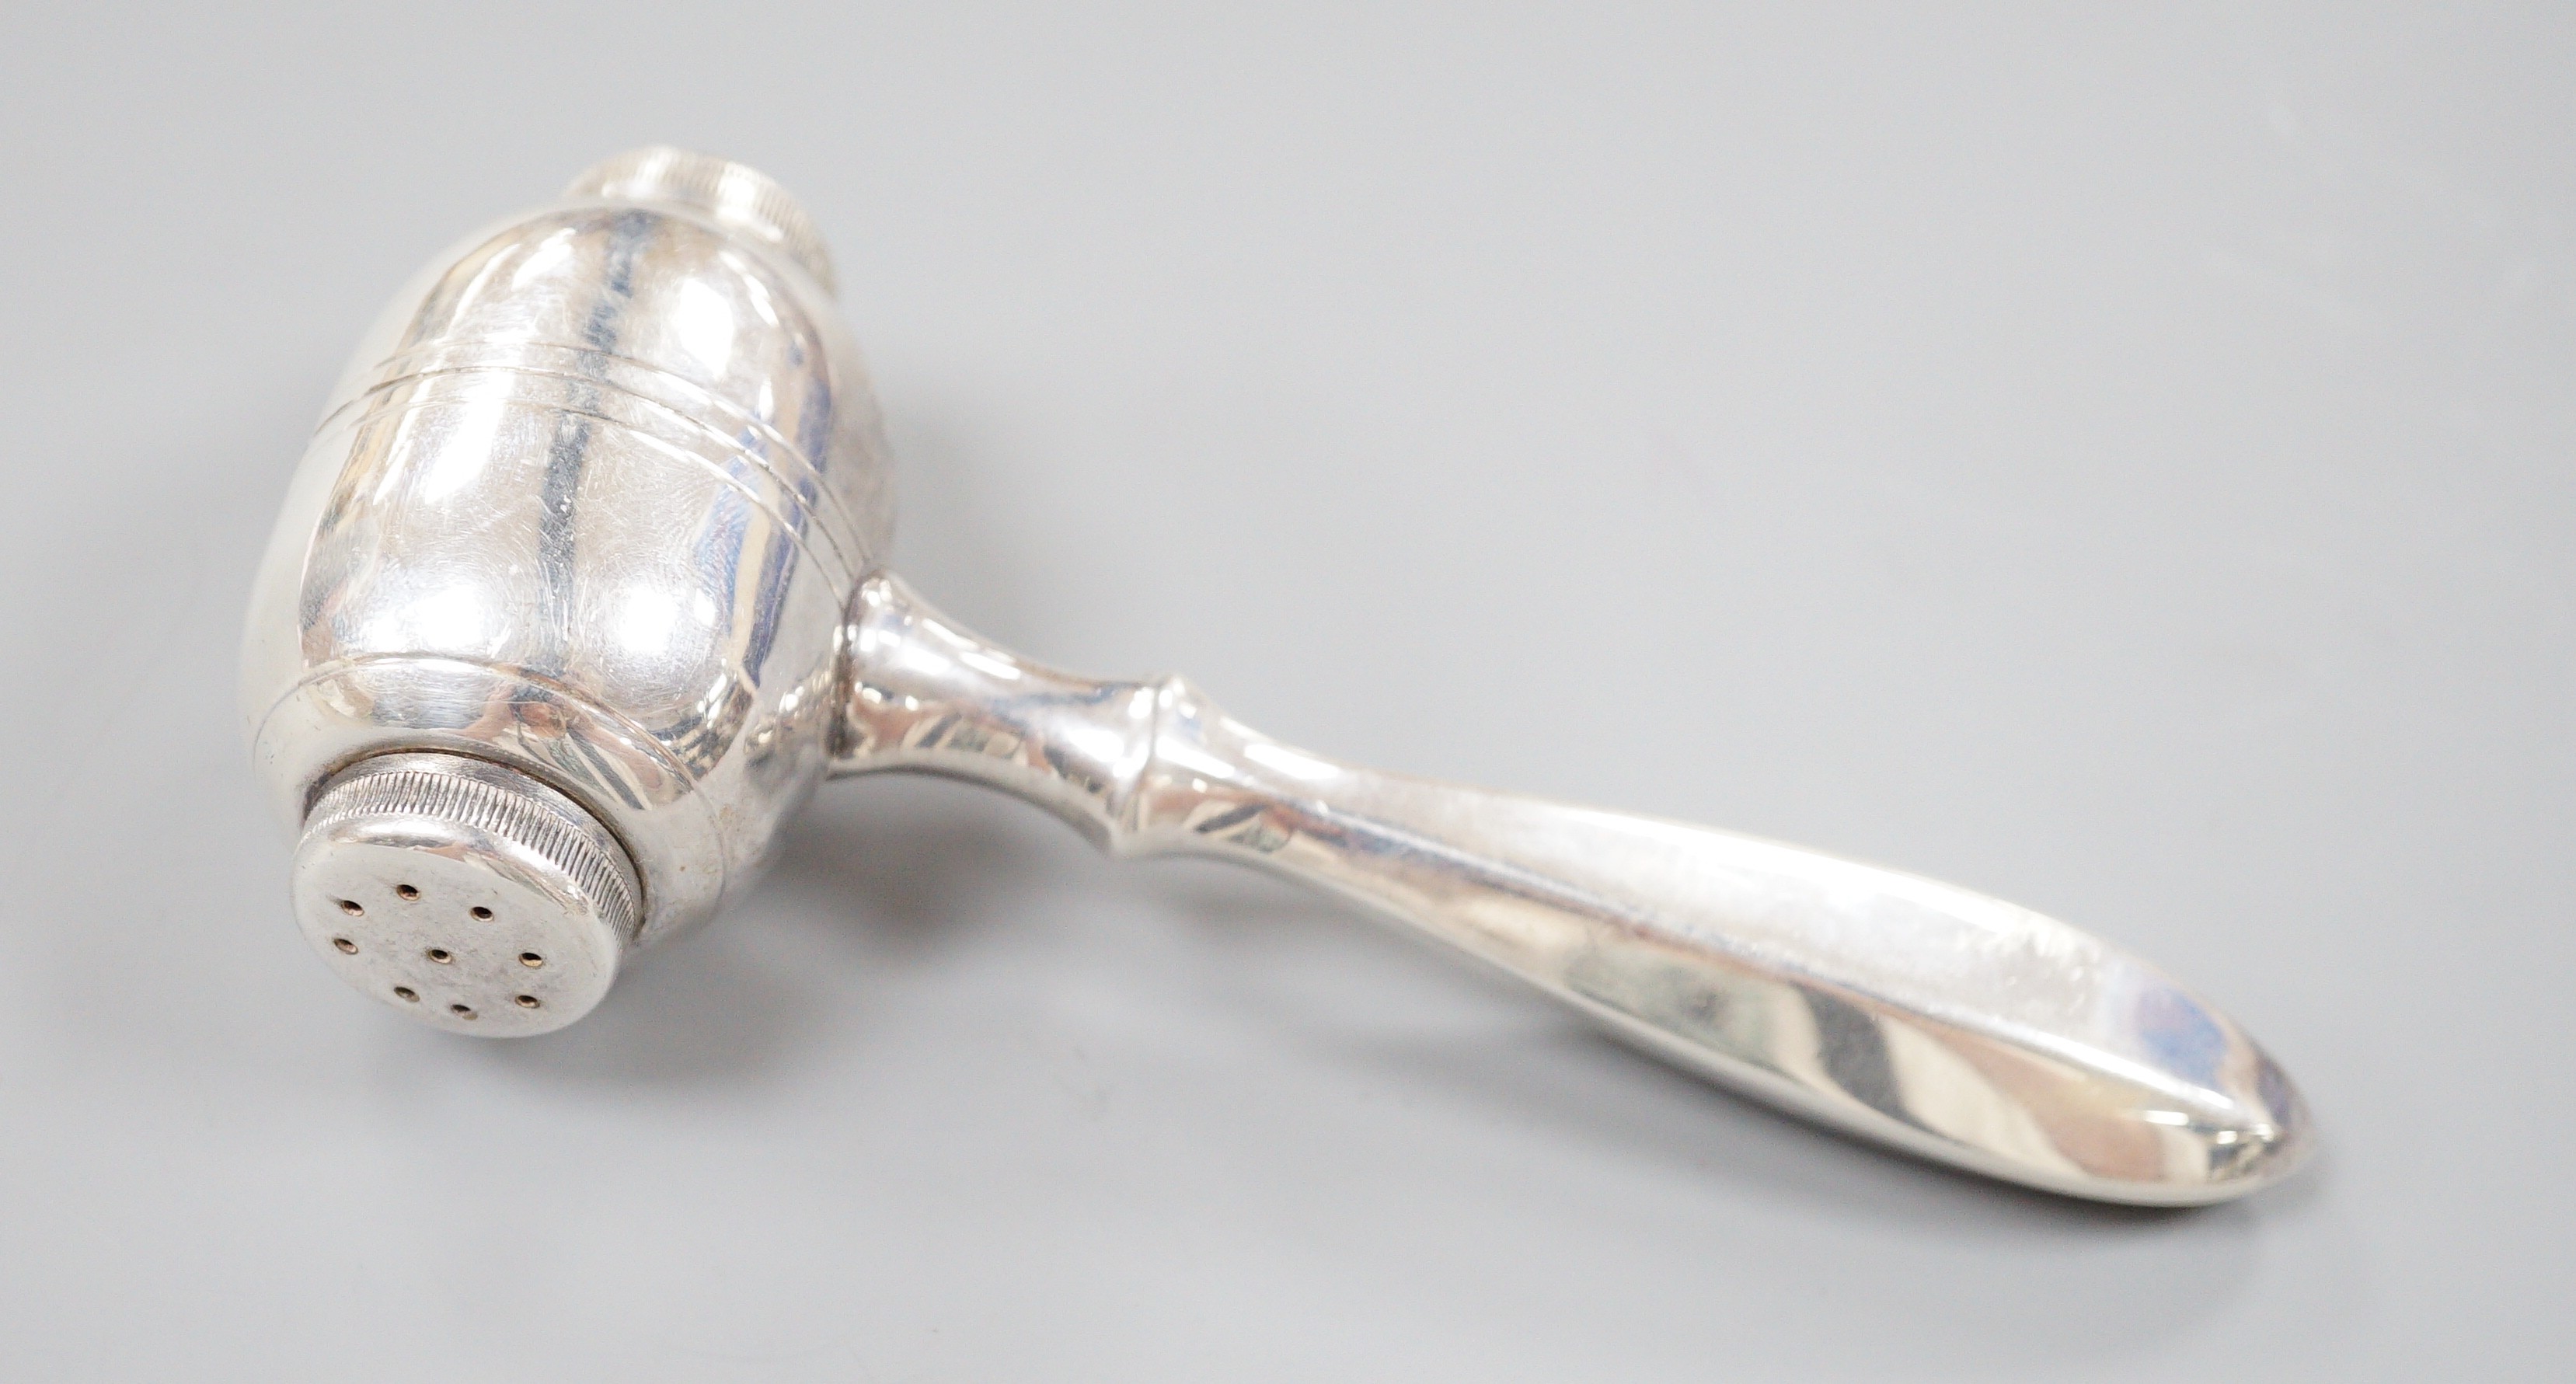 A novelty silver plated condiment dispenser, modelled as a gavel, 14cm.